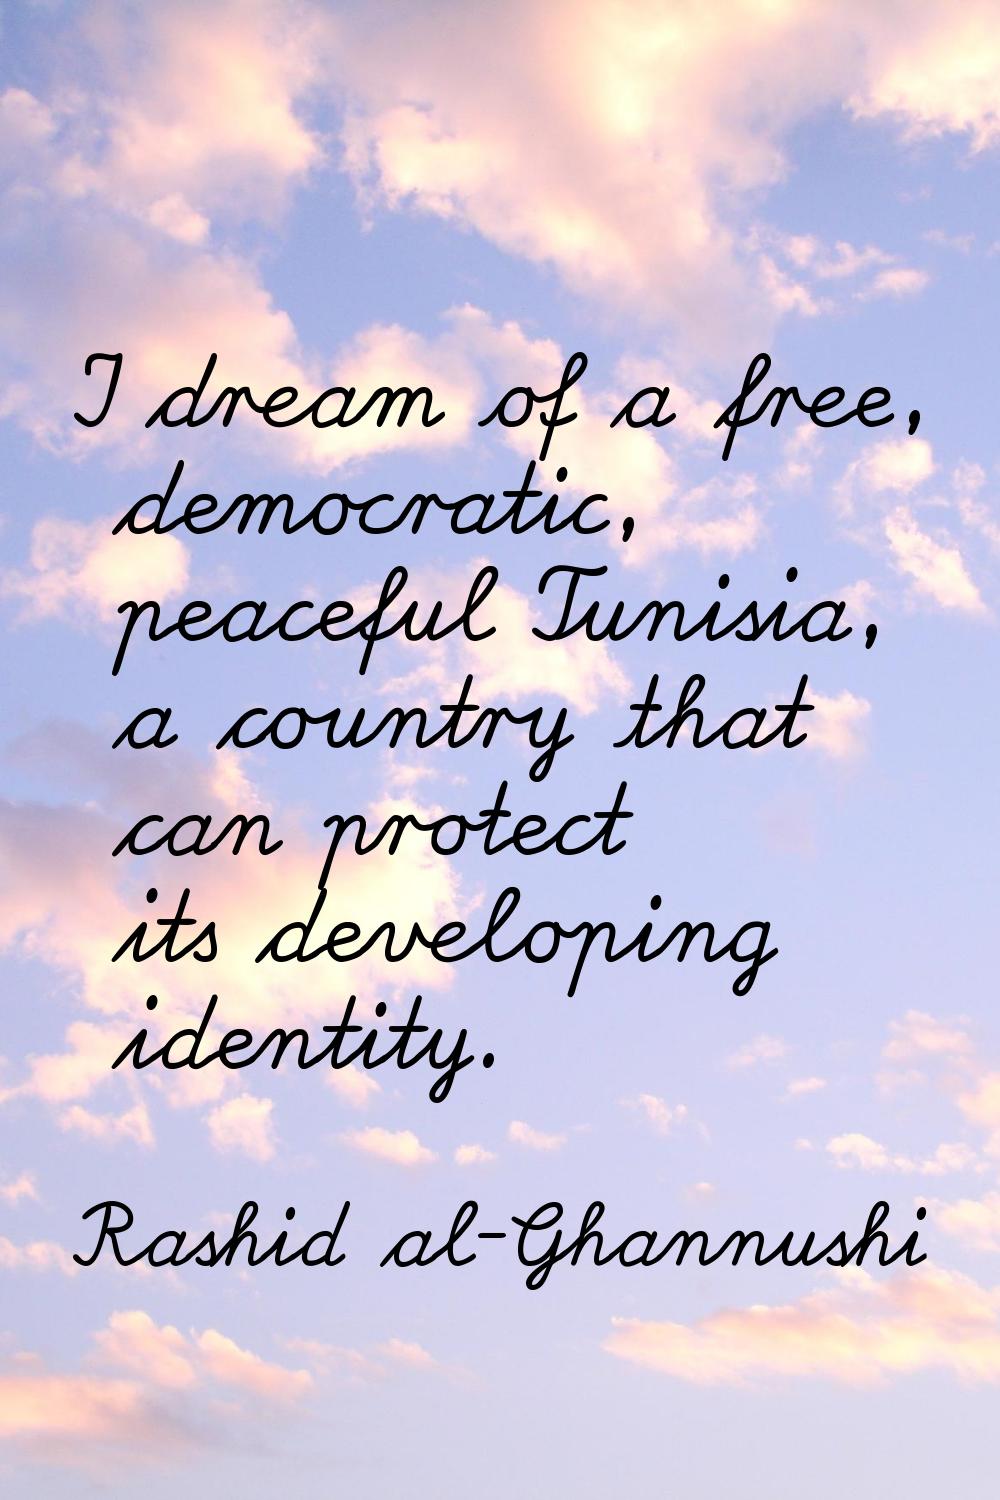 I dream of a free, democratic, peaceful Tunisia, a country that can protect its developing identity